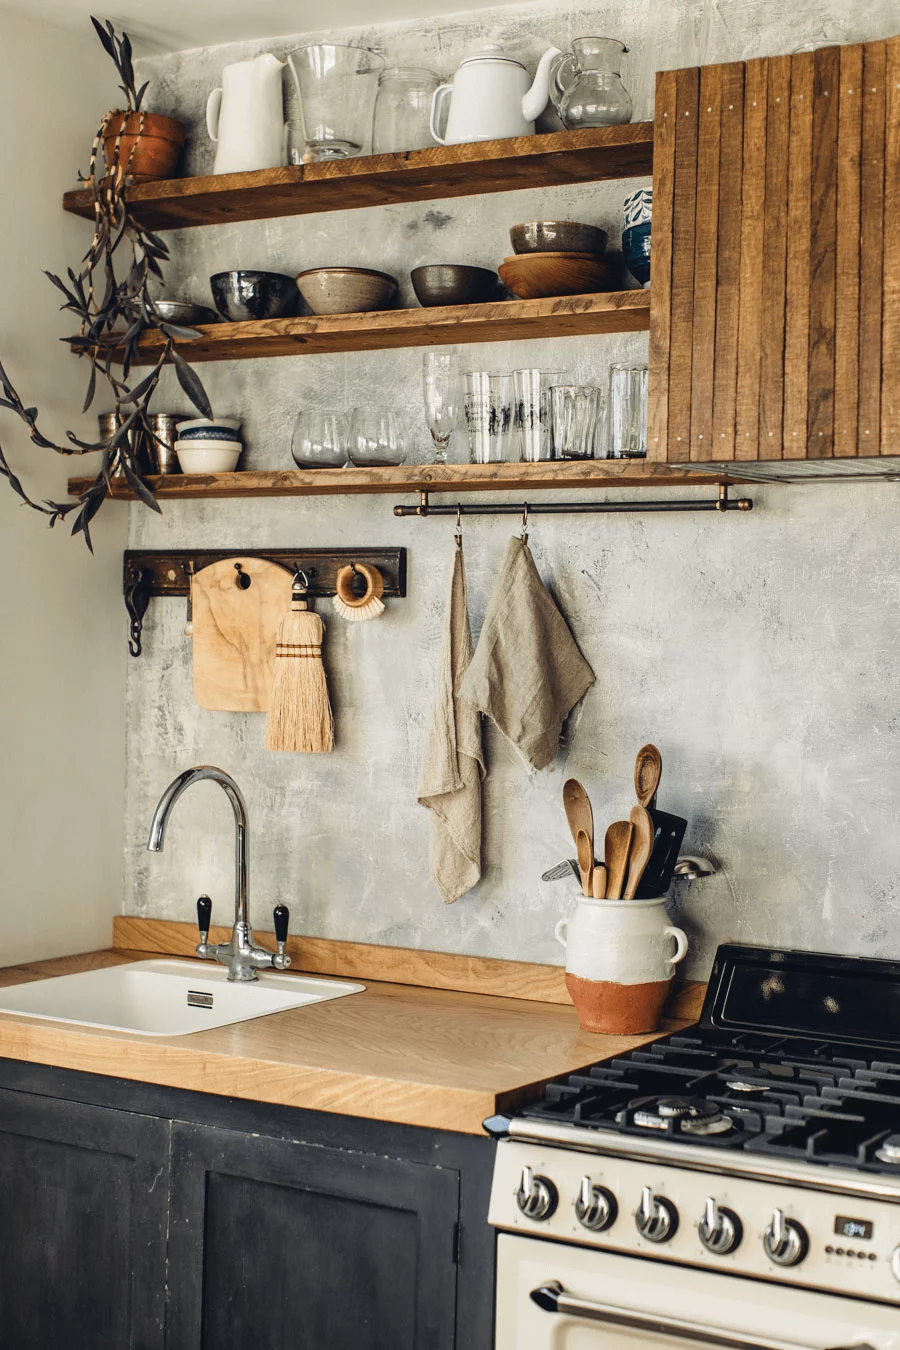 this is a rustic look Scandinavian kitchen with wooden shelves and a arga oven(1)